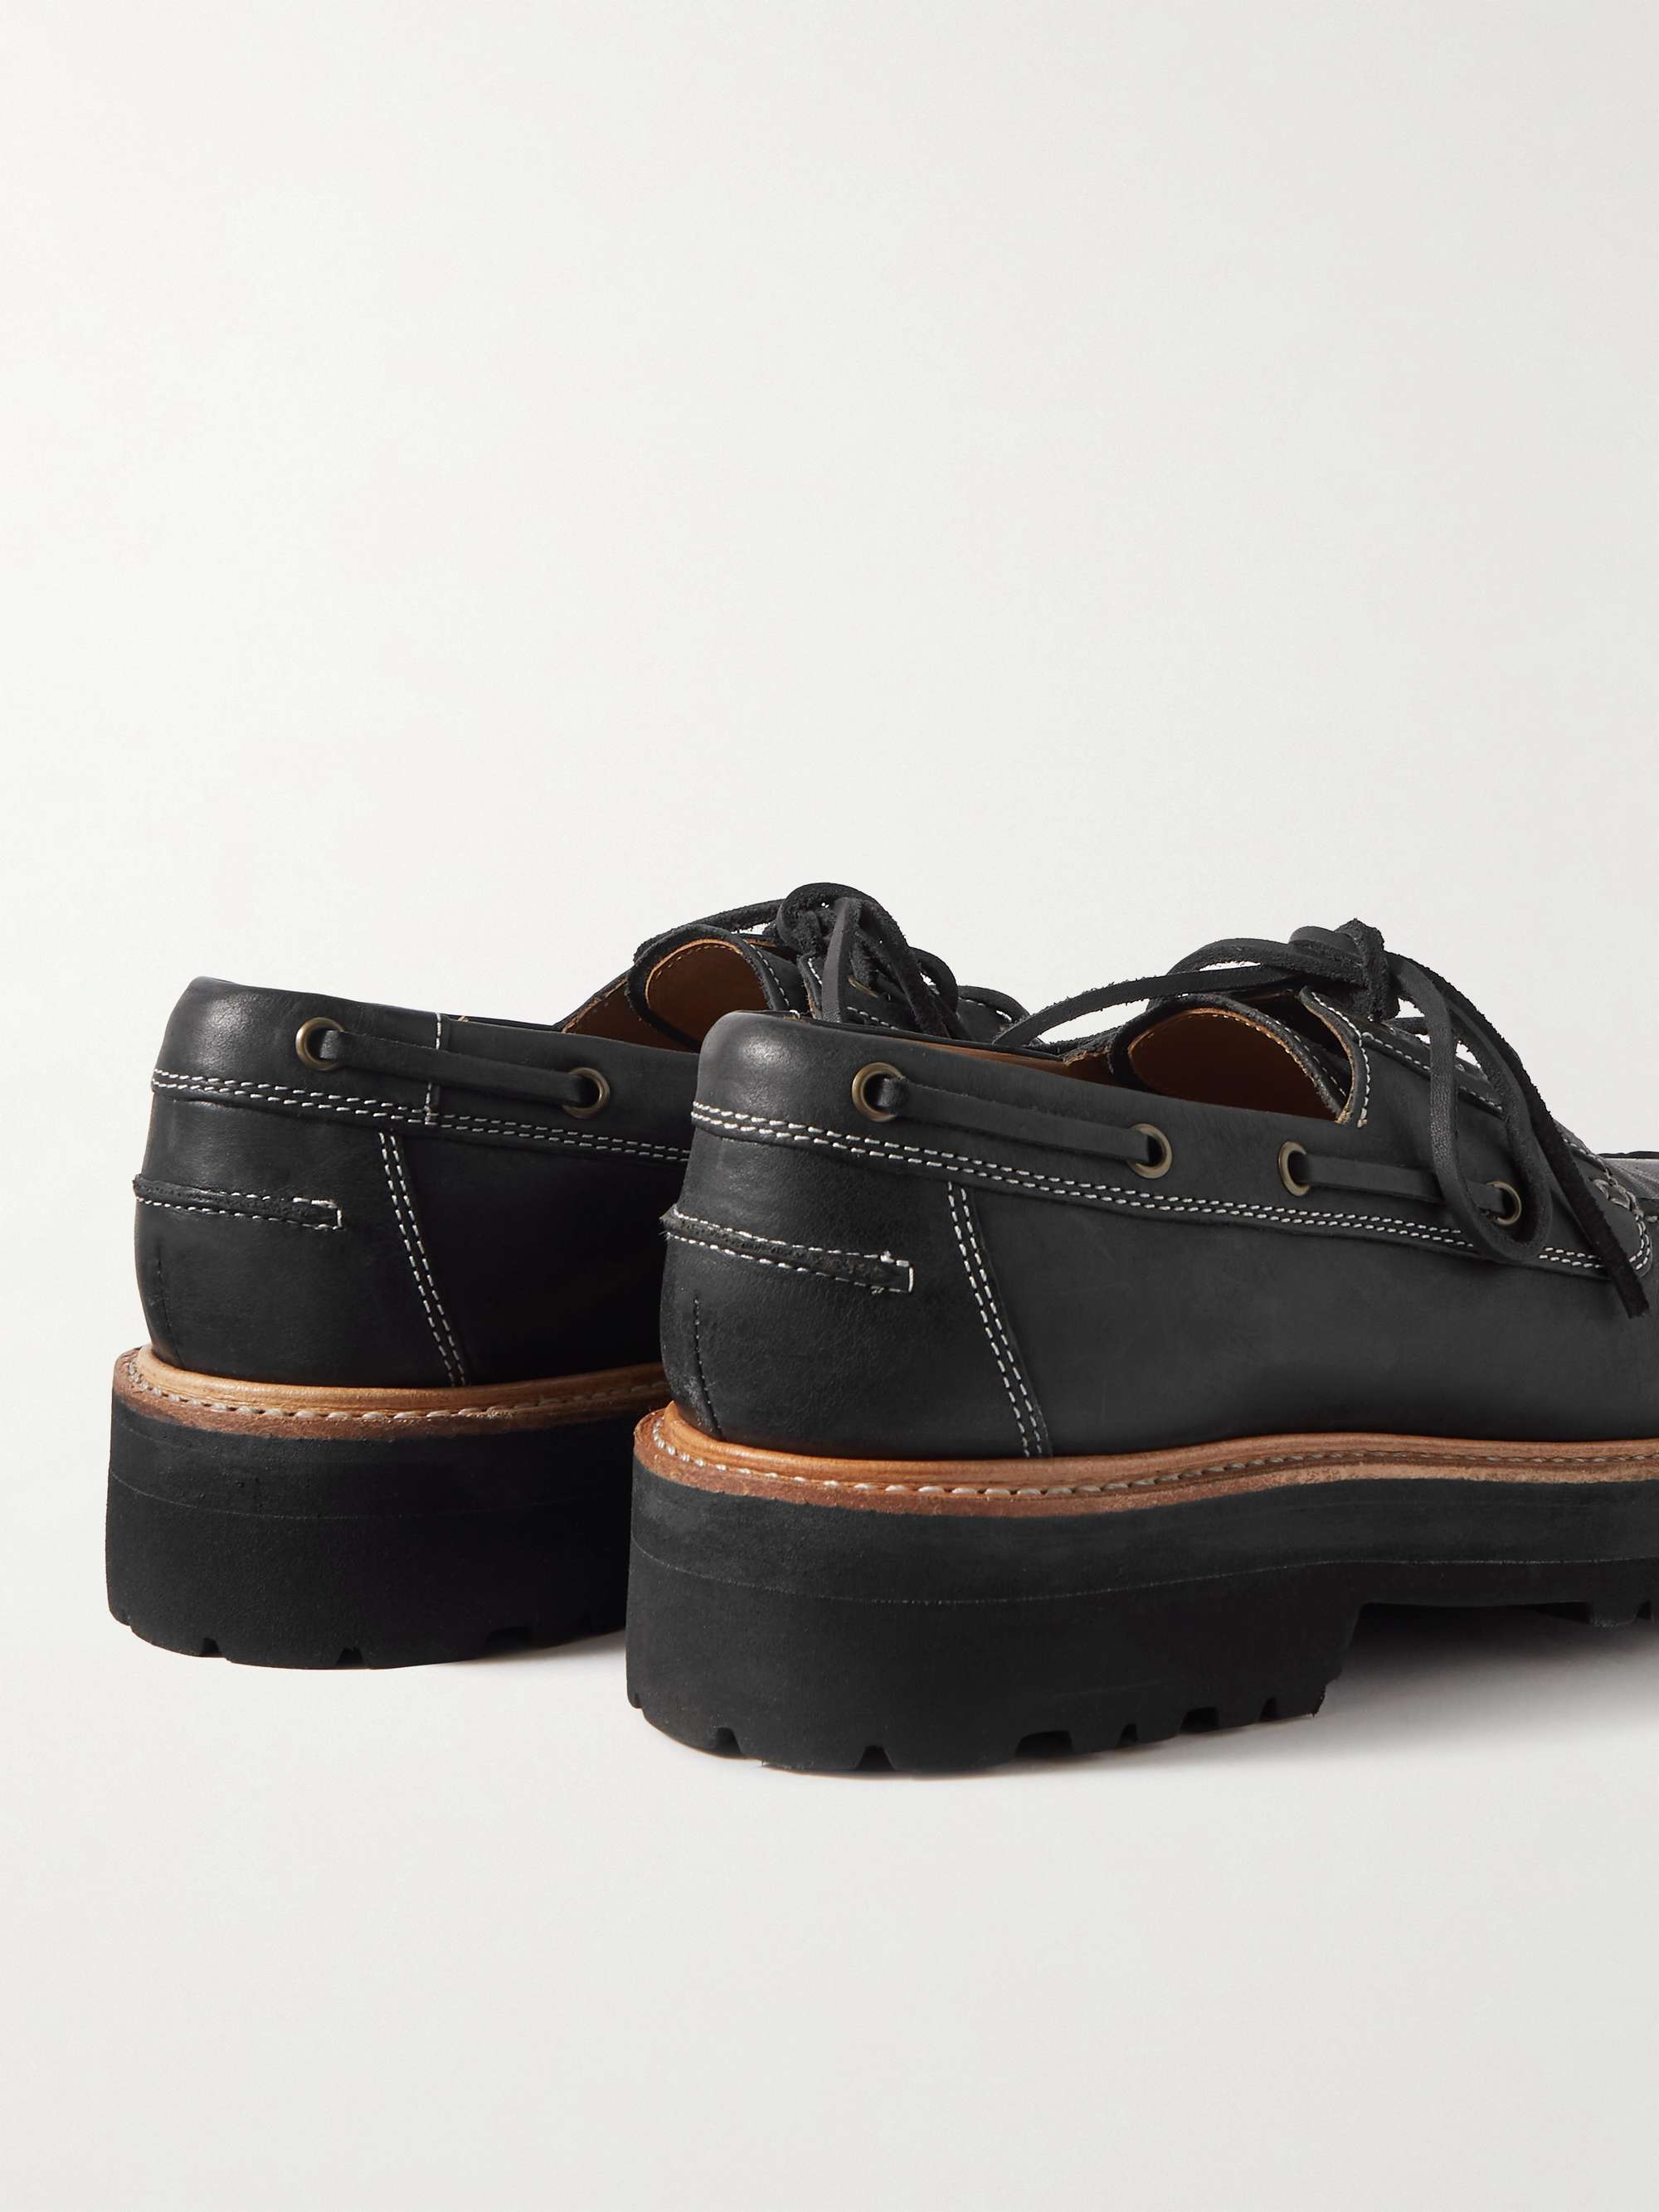 GRENSON Demspey Leather Boat Shoes